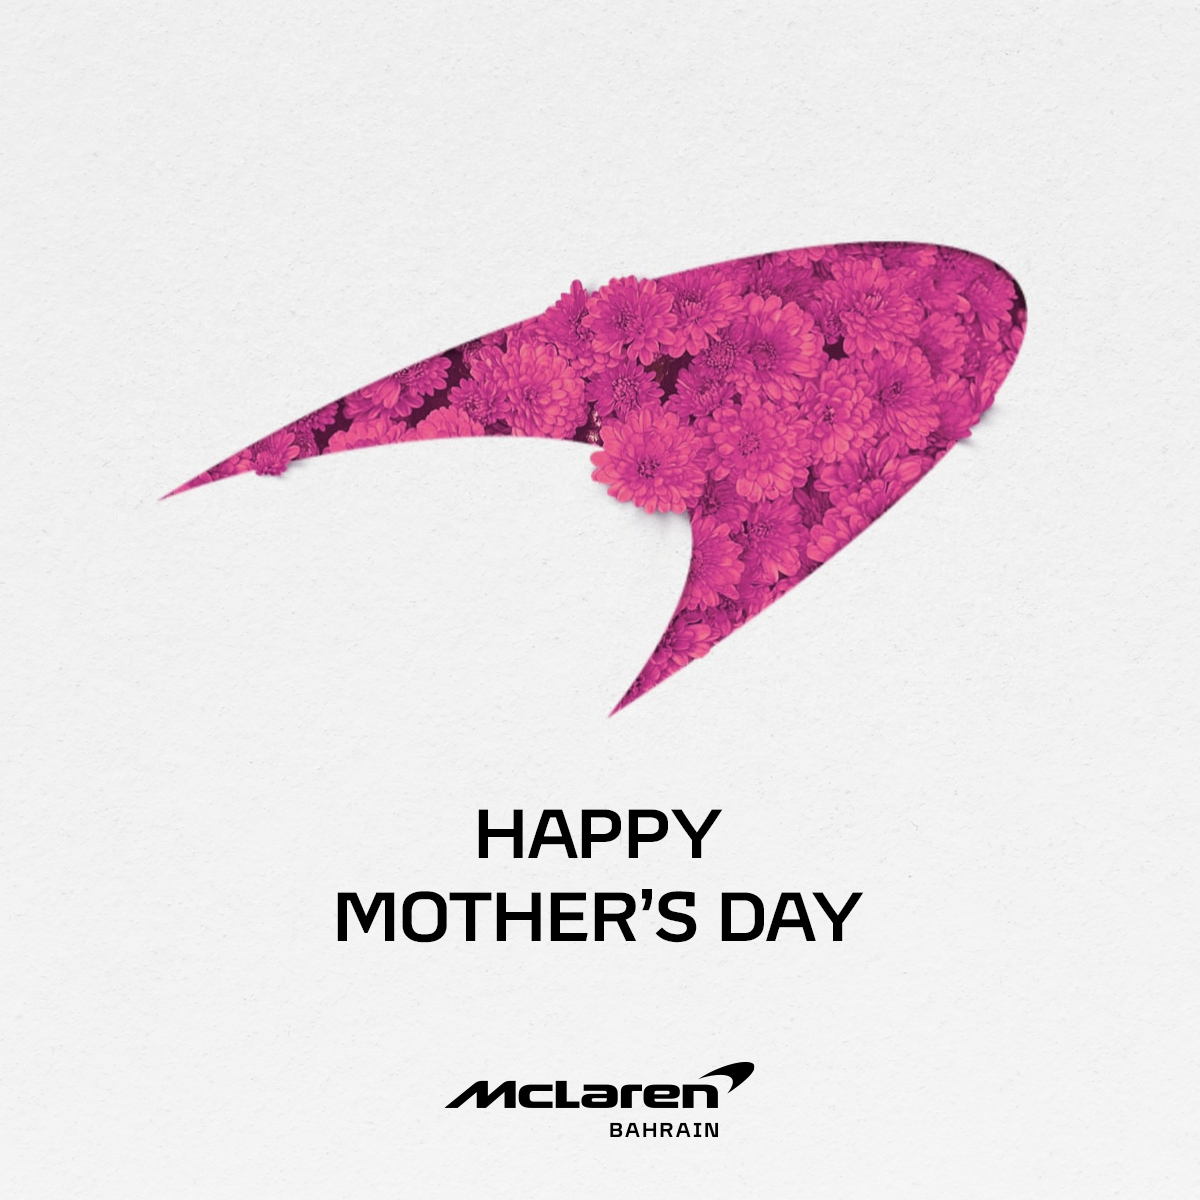 Wishing you all the love and happiness you so richly deserve. Happy Mother's Day نتمنى لكم كل الحب والسعادة التي تستحقونها. #يوم_الأم #Mothersday #MclarenBahrain